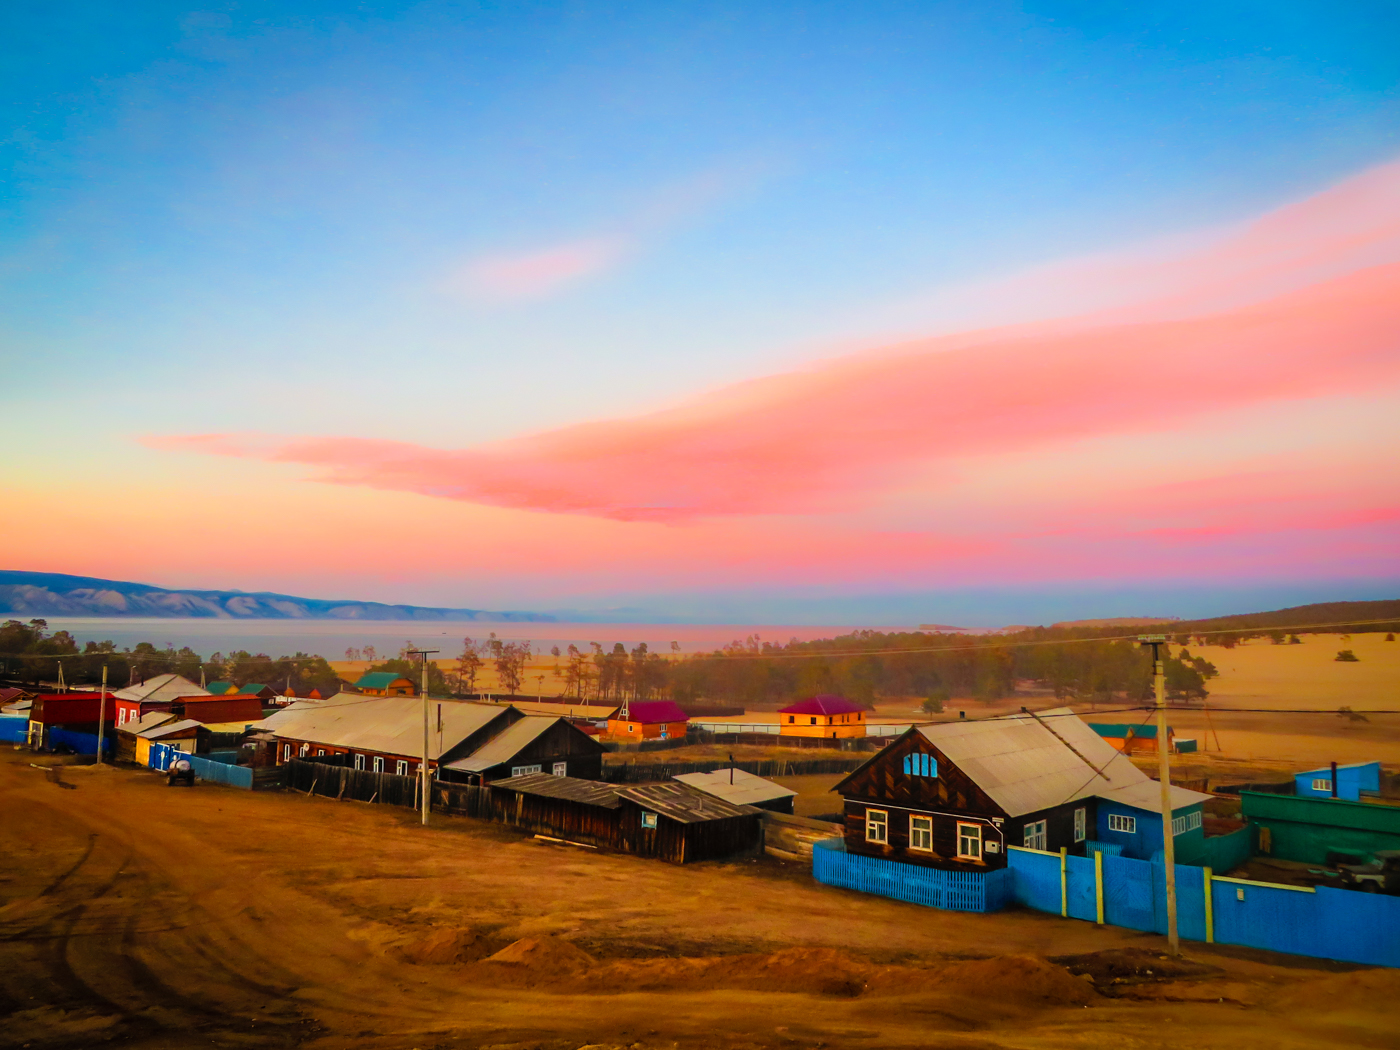 A village in the middle of the Trans-Siberian Railway